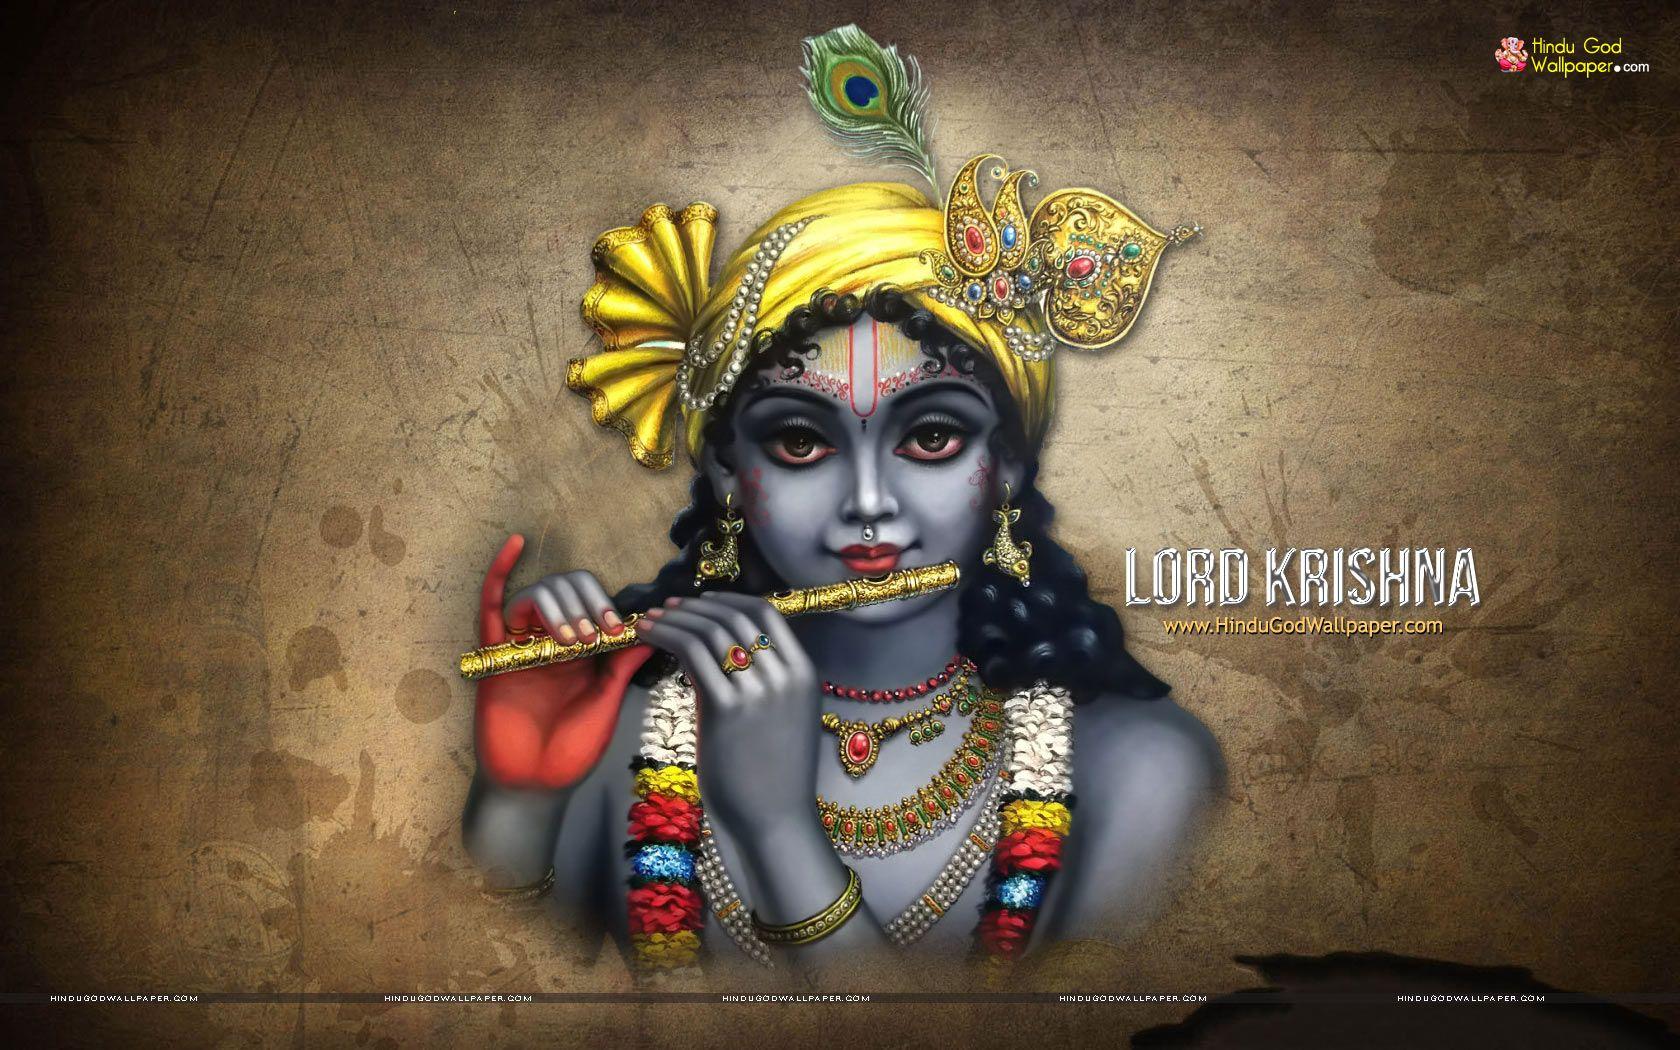 Lord Krishna Hd Wallpapers For Mobile Free Download - yolablitz